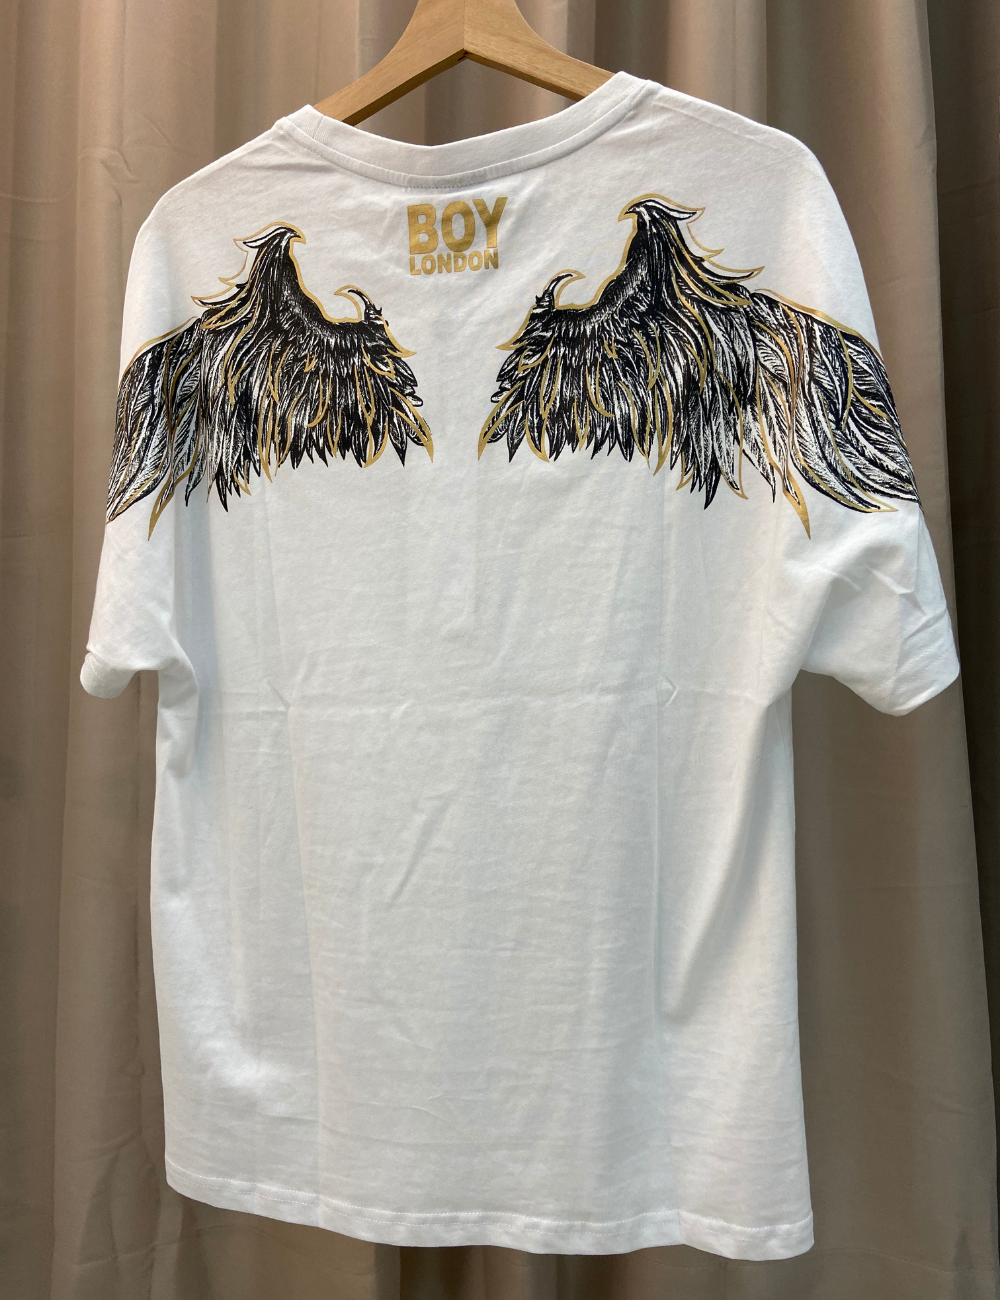 Boy London Save World Eagle Wing Tee (White) – The Factory KL